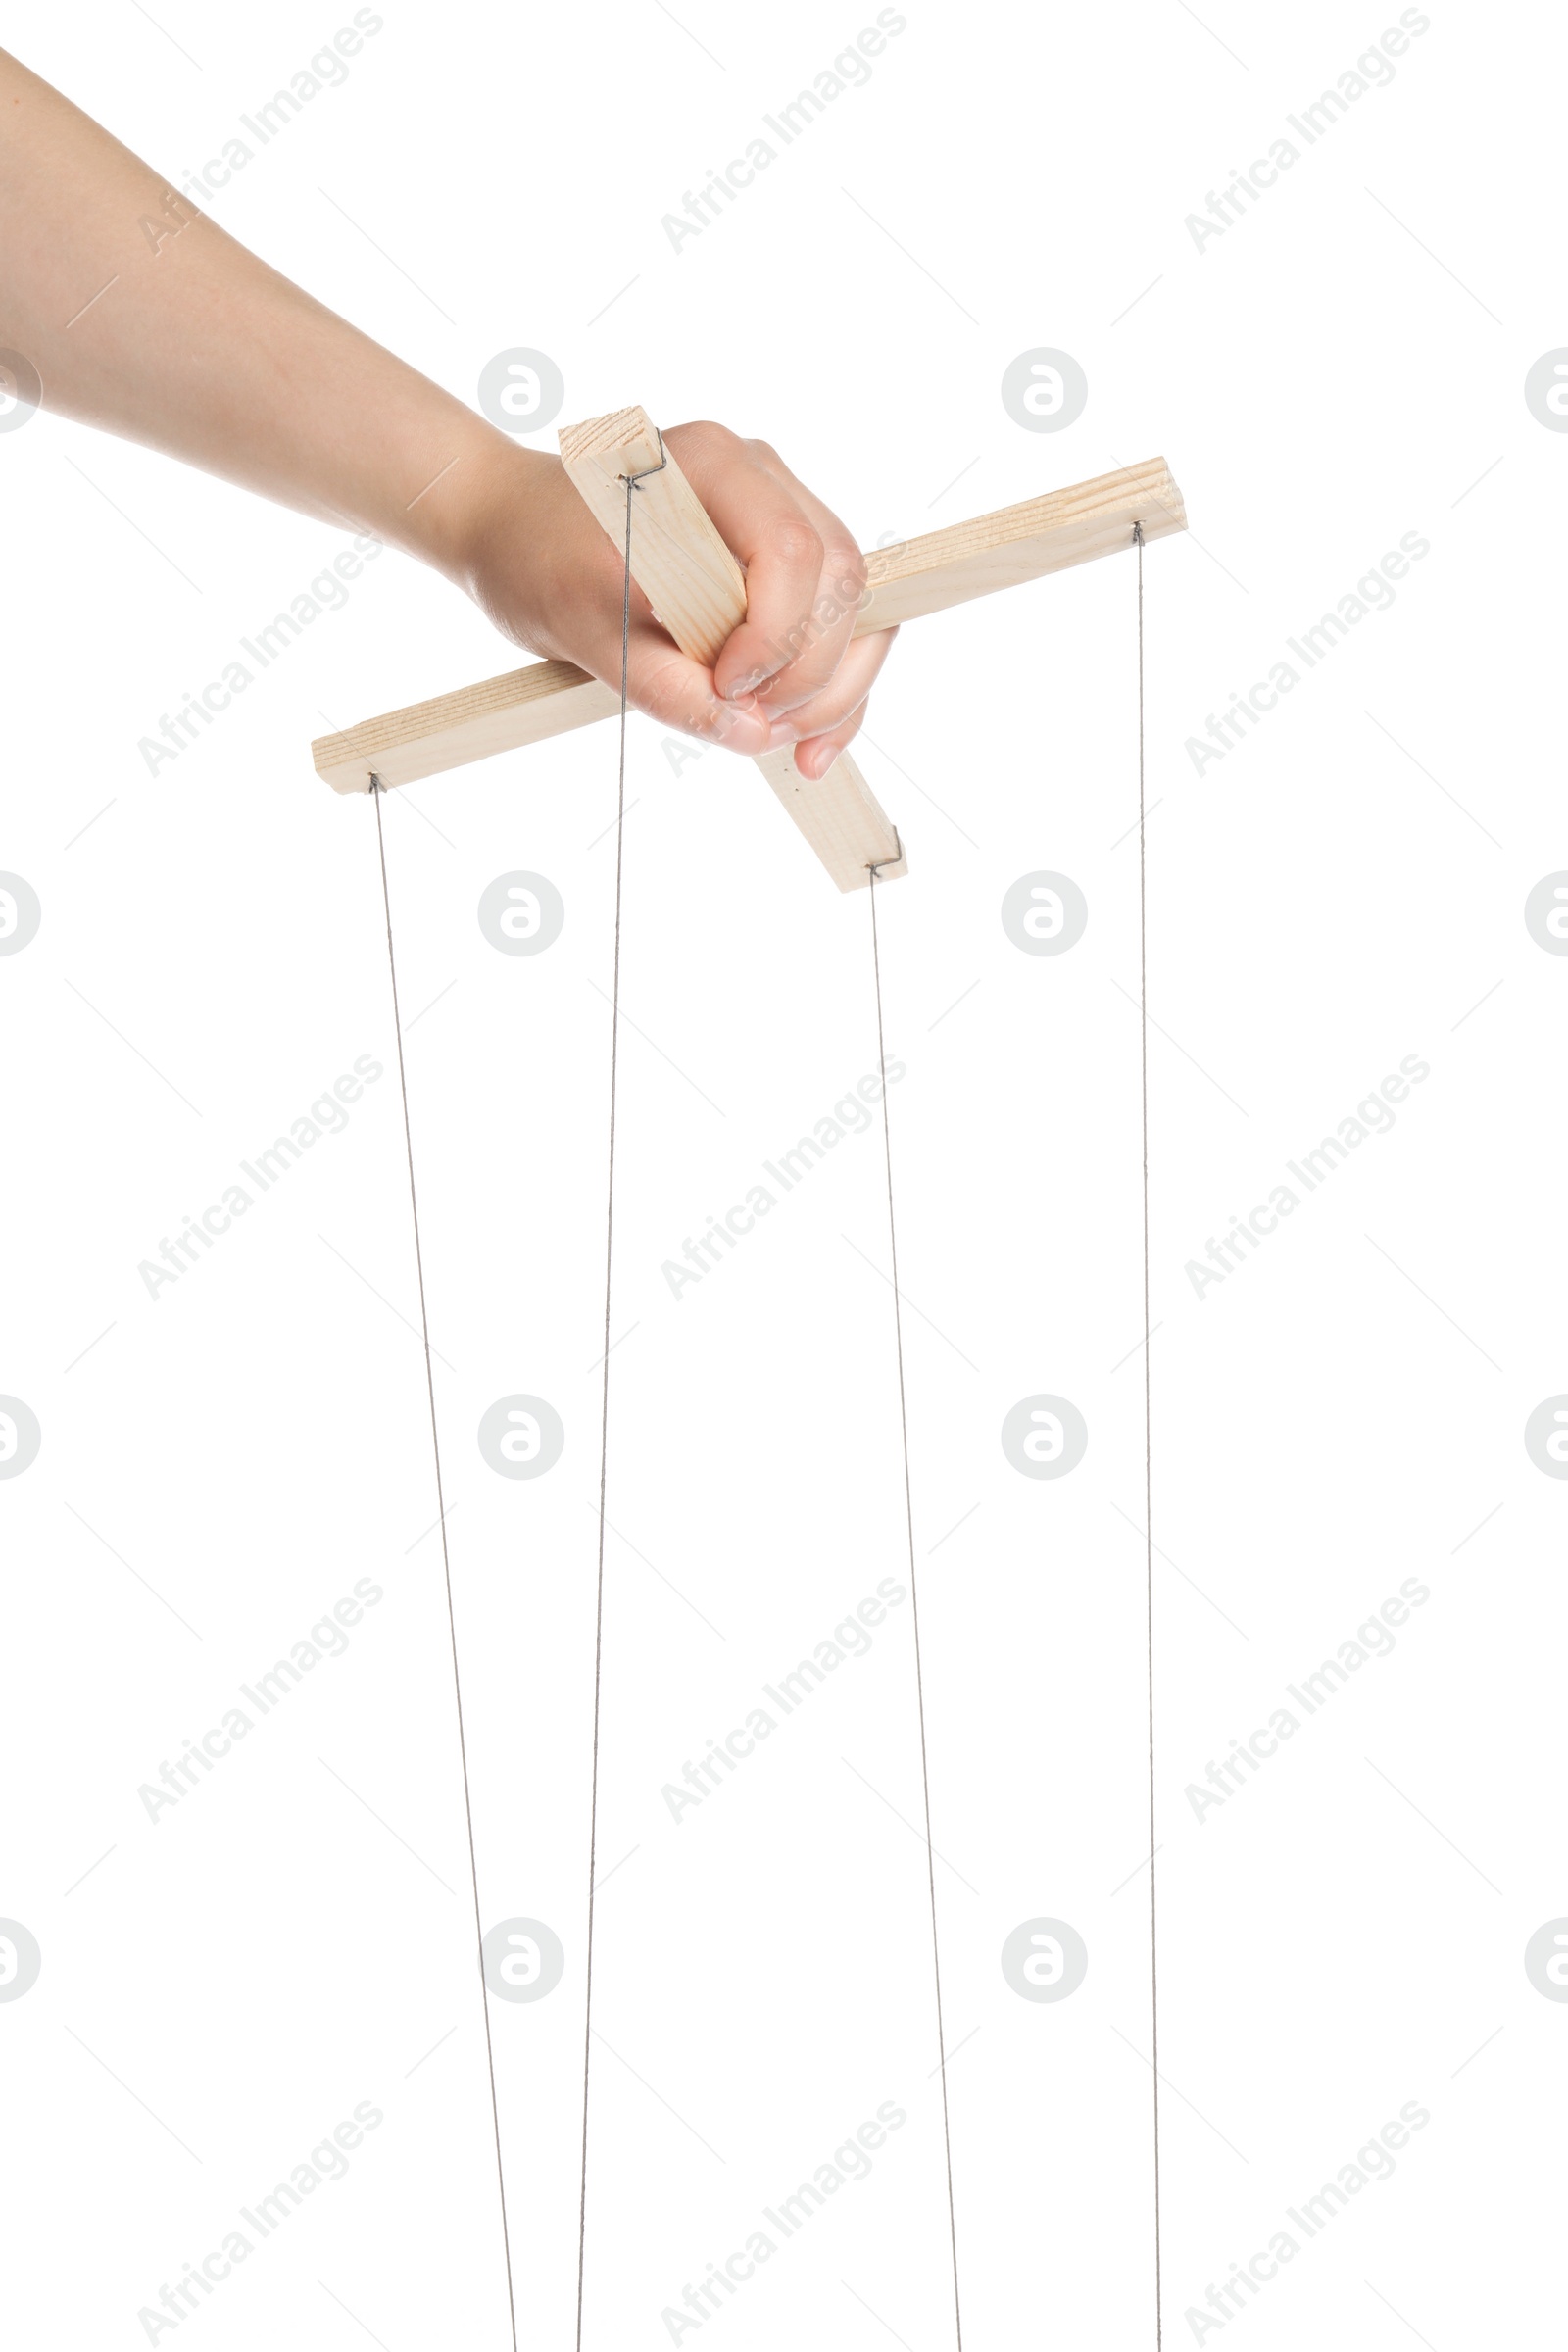 Photo of Woman pulling strings of puppet on white background, closeup